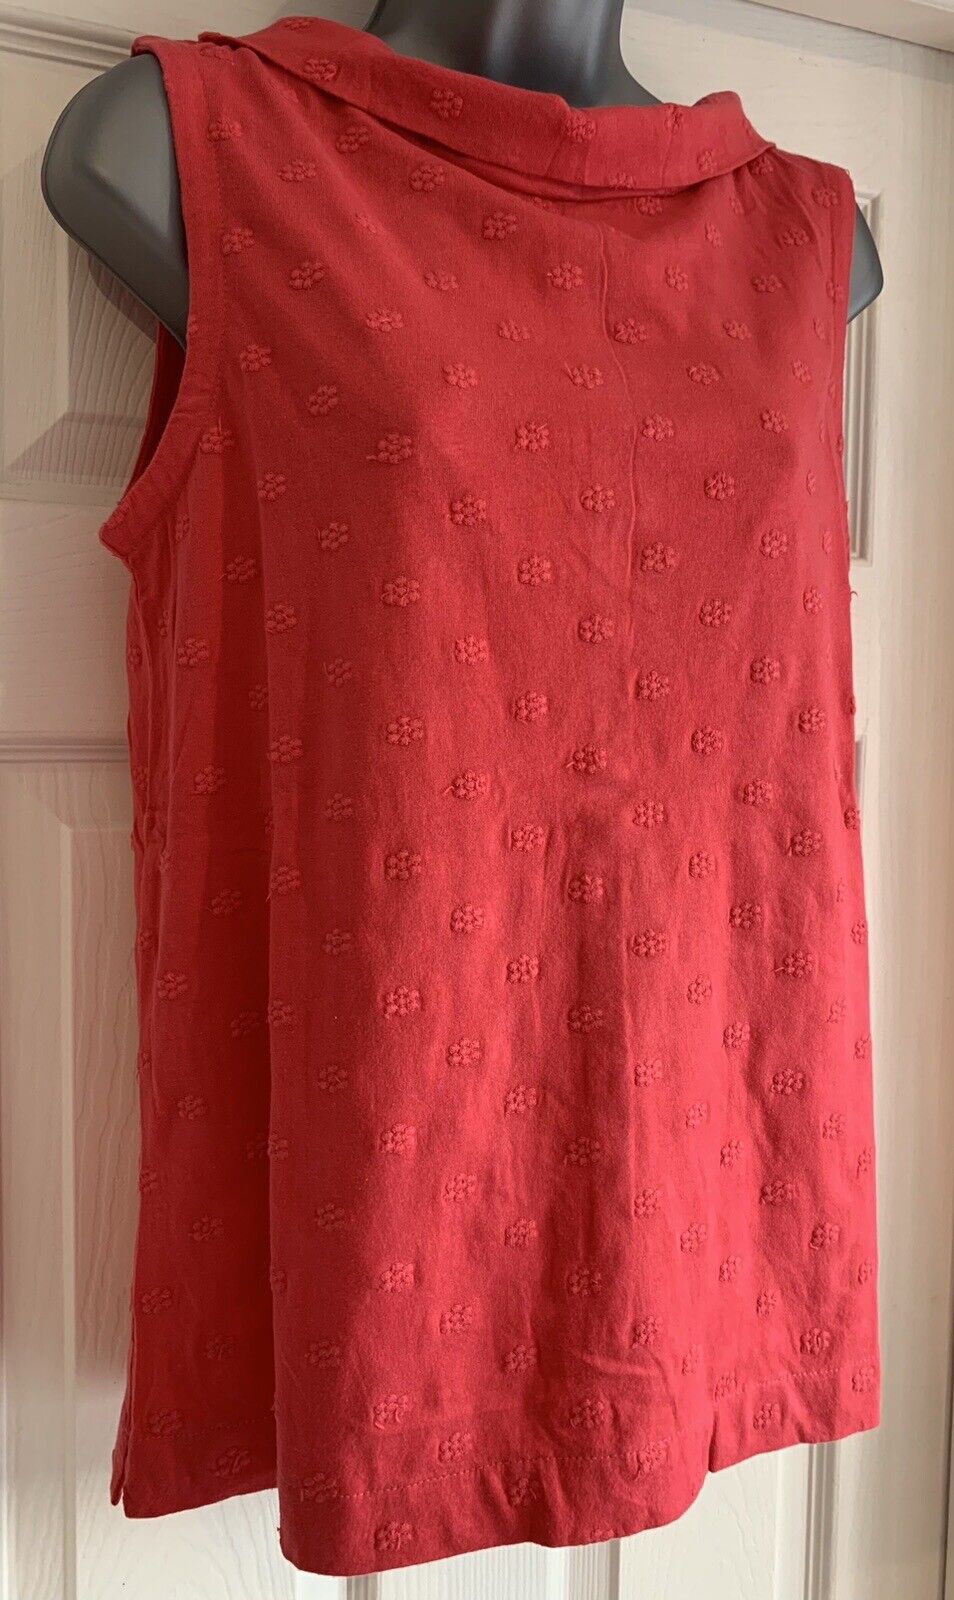 EX White Stuff Red Embroidered Petal Tank Vest Sizes 10 or 18 SECONDS